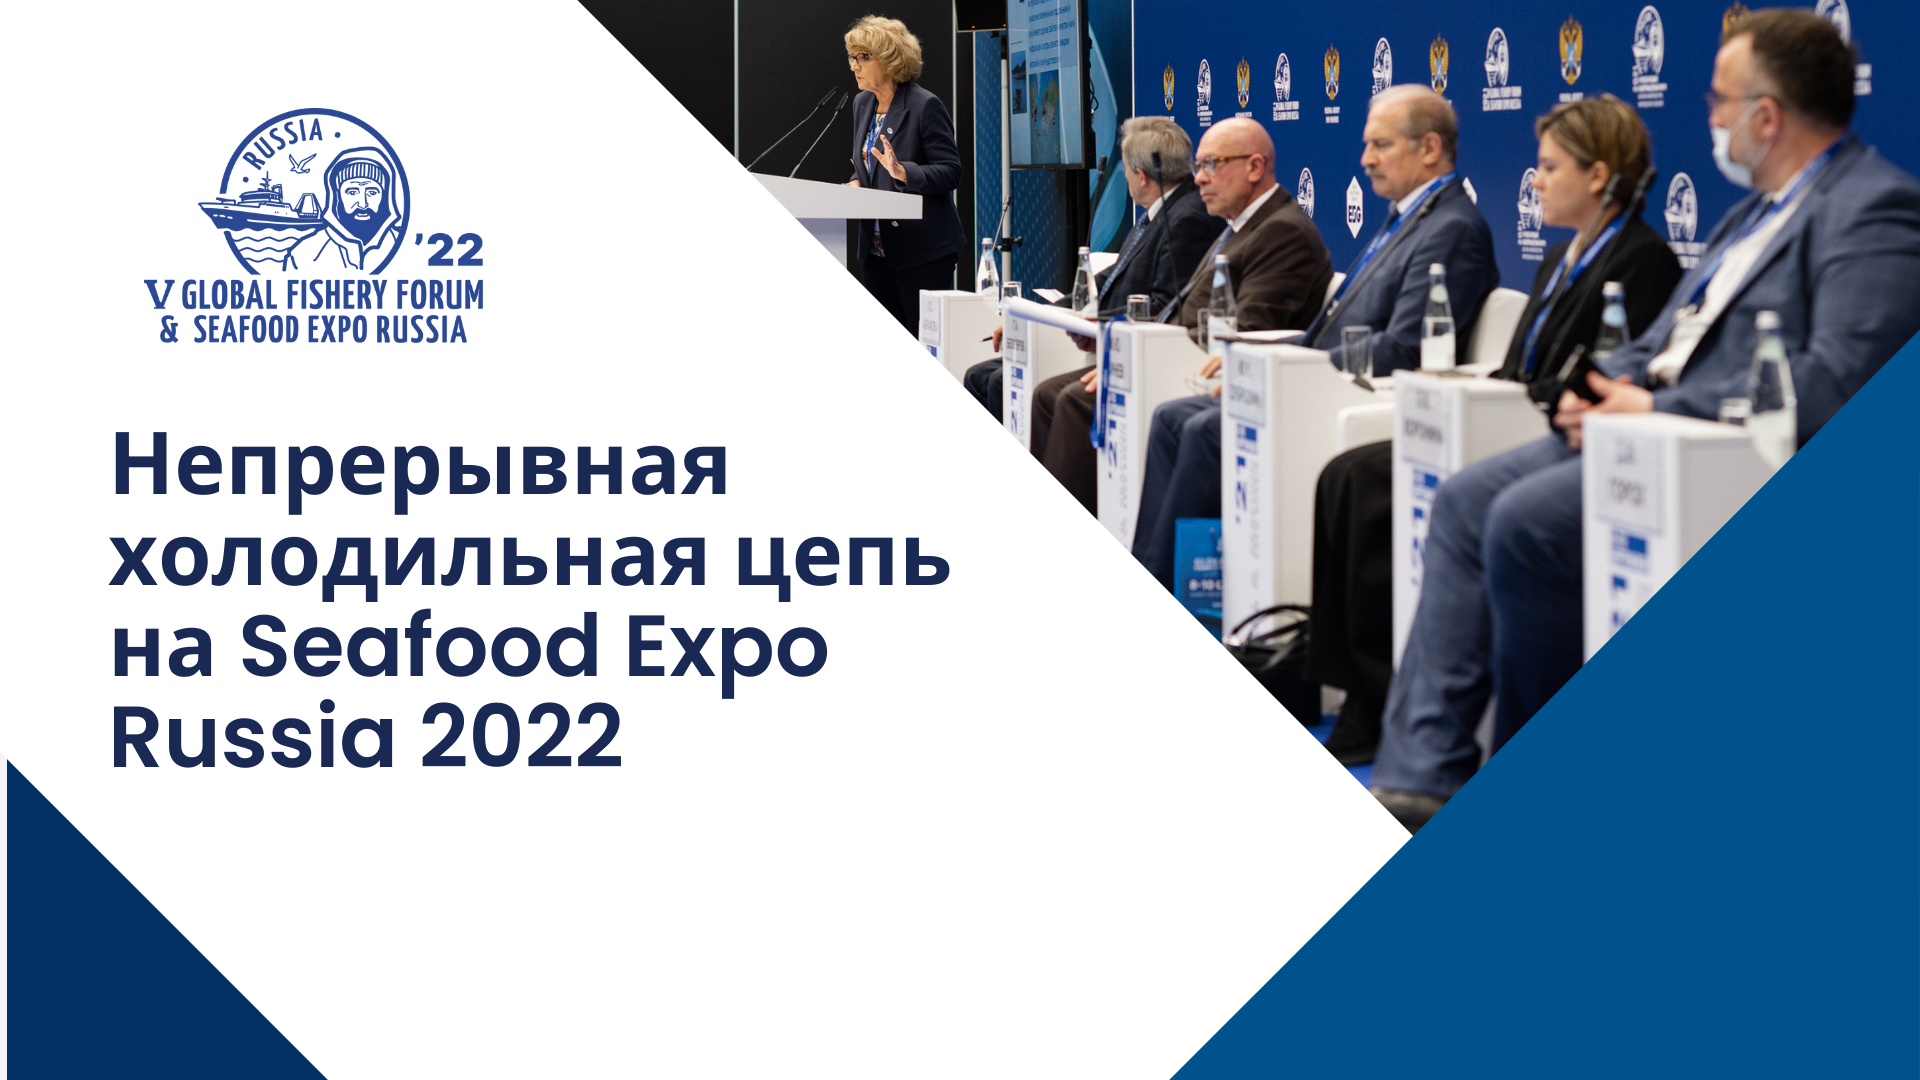 Delivery of Perishable Products to be Discussed at Seafood Expo Russia